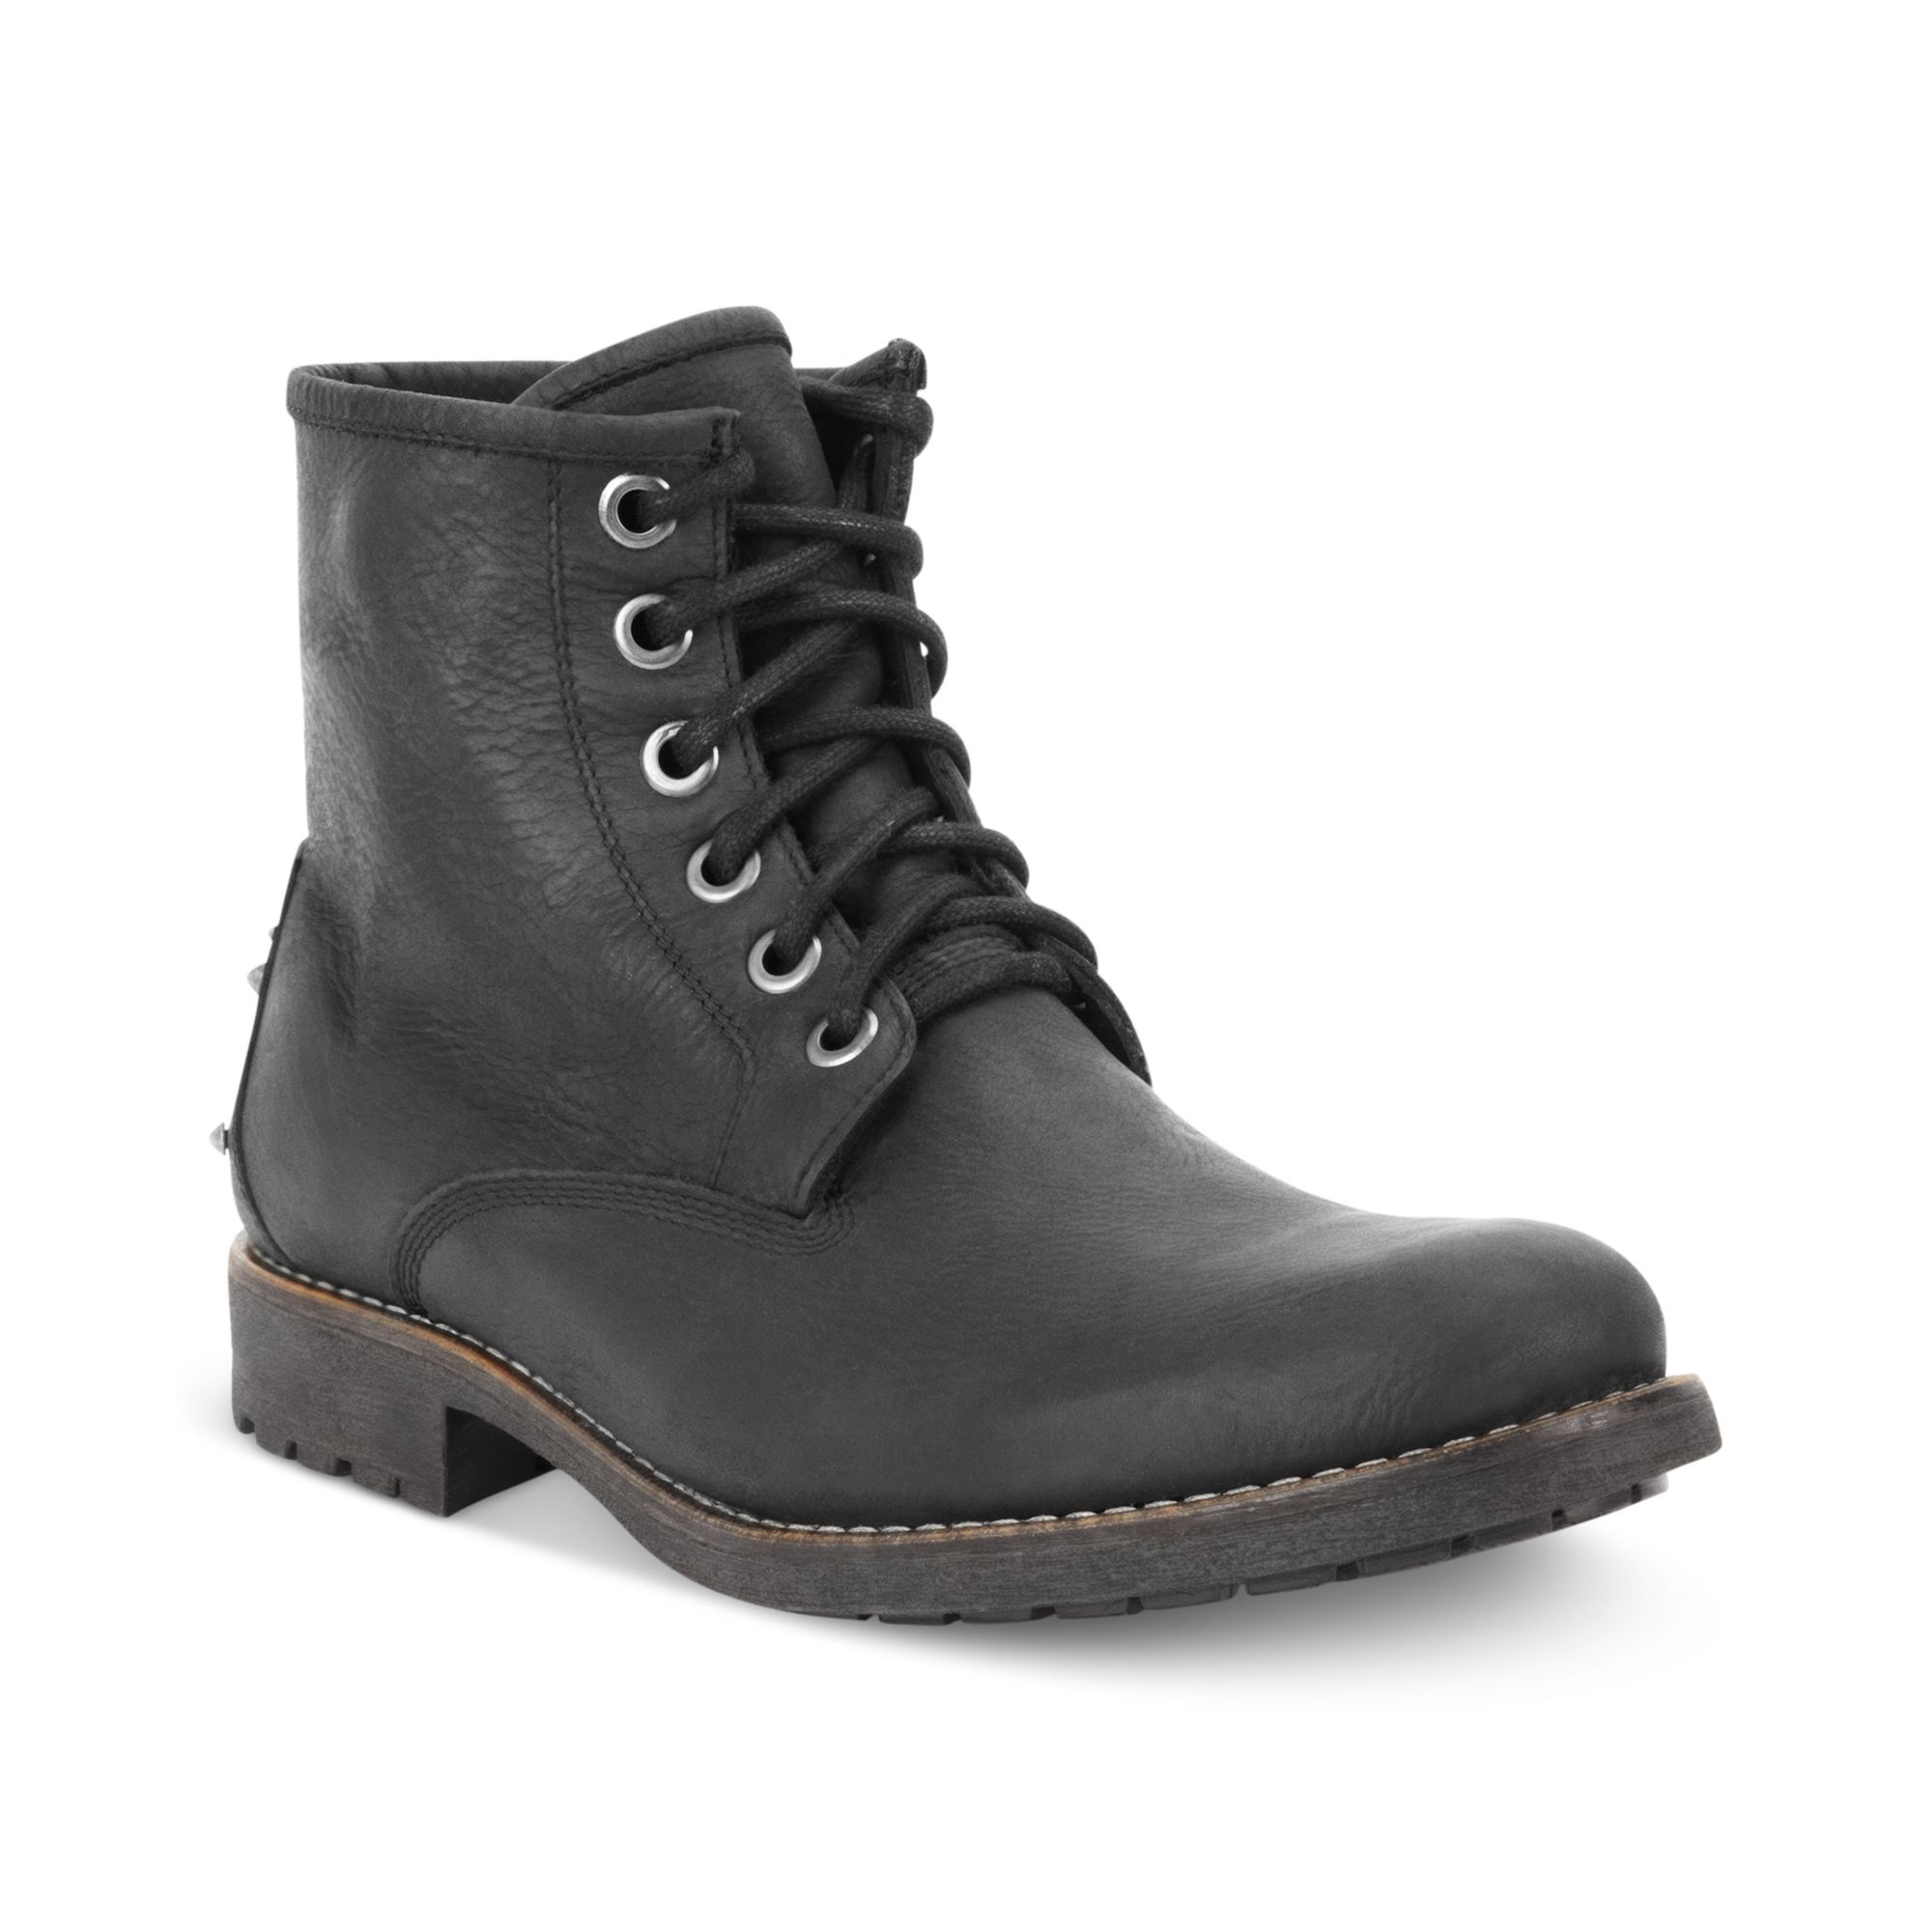 Guess Mens Shoes Spence Boots in Black 